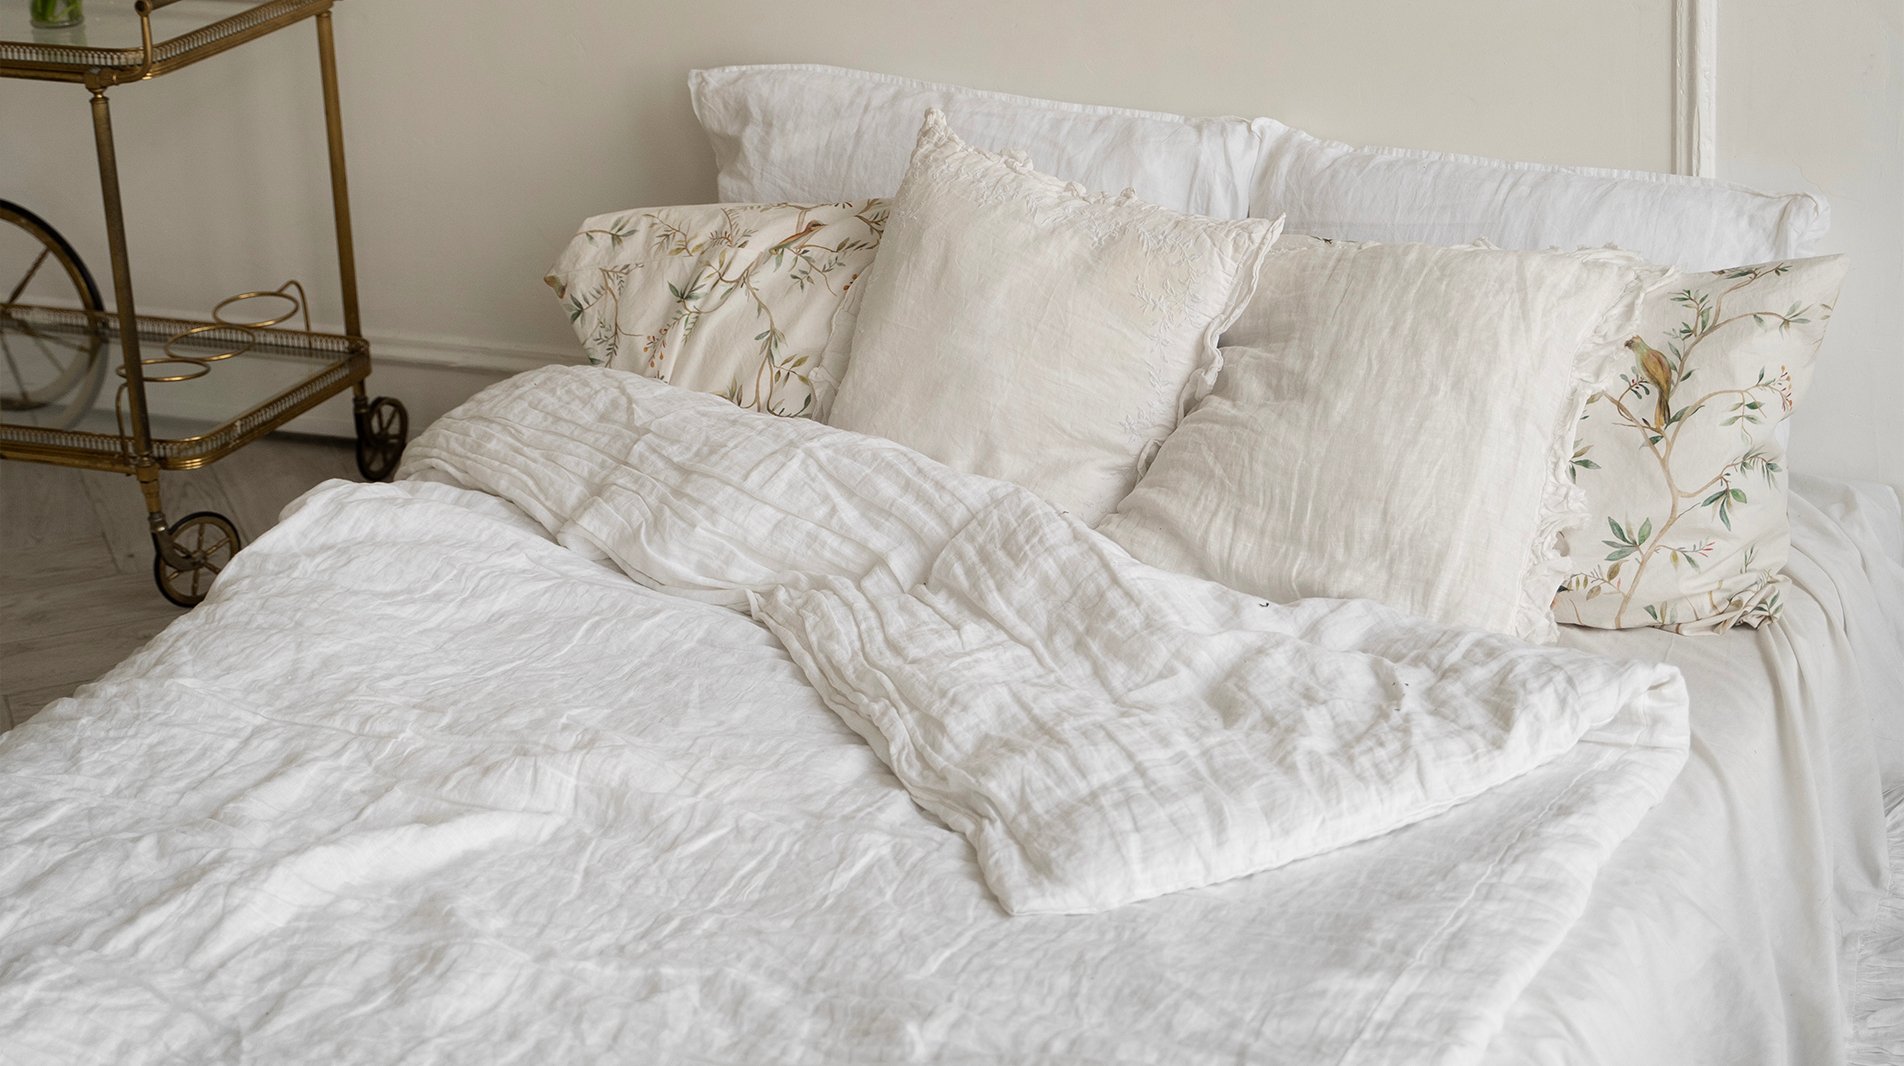 Things to Consider When Choosing a Duvet Cover Set